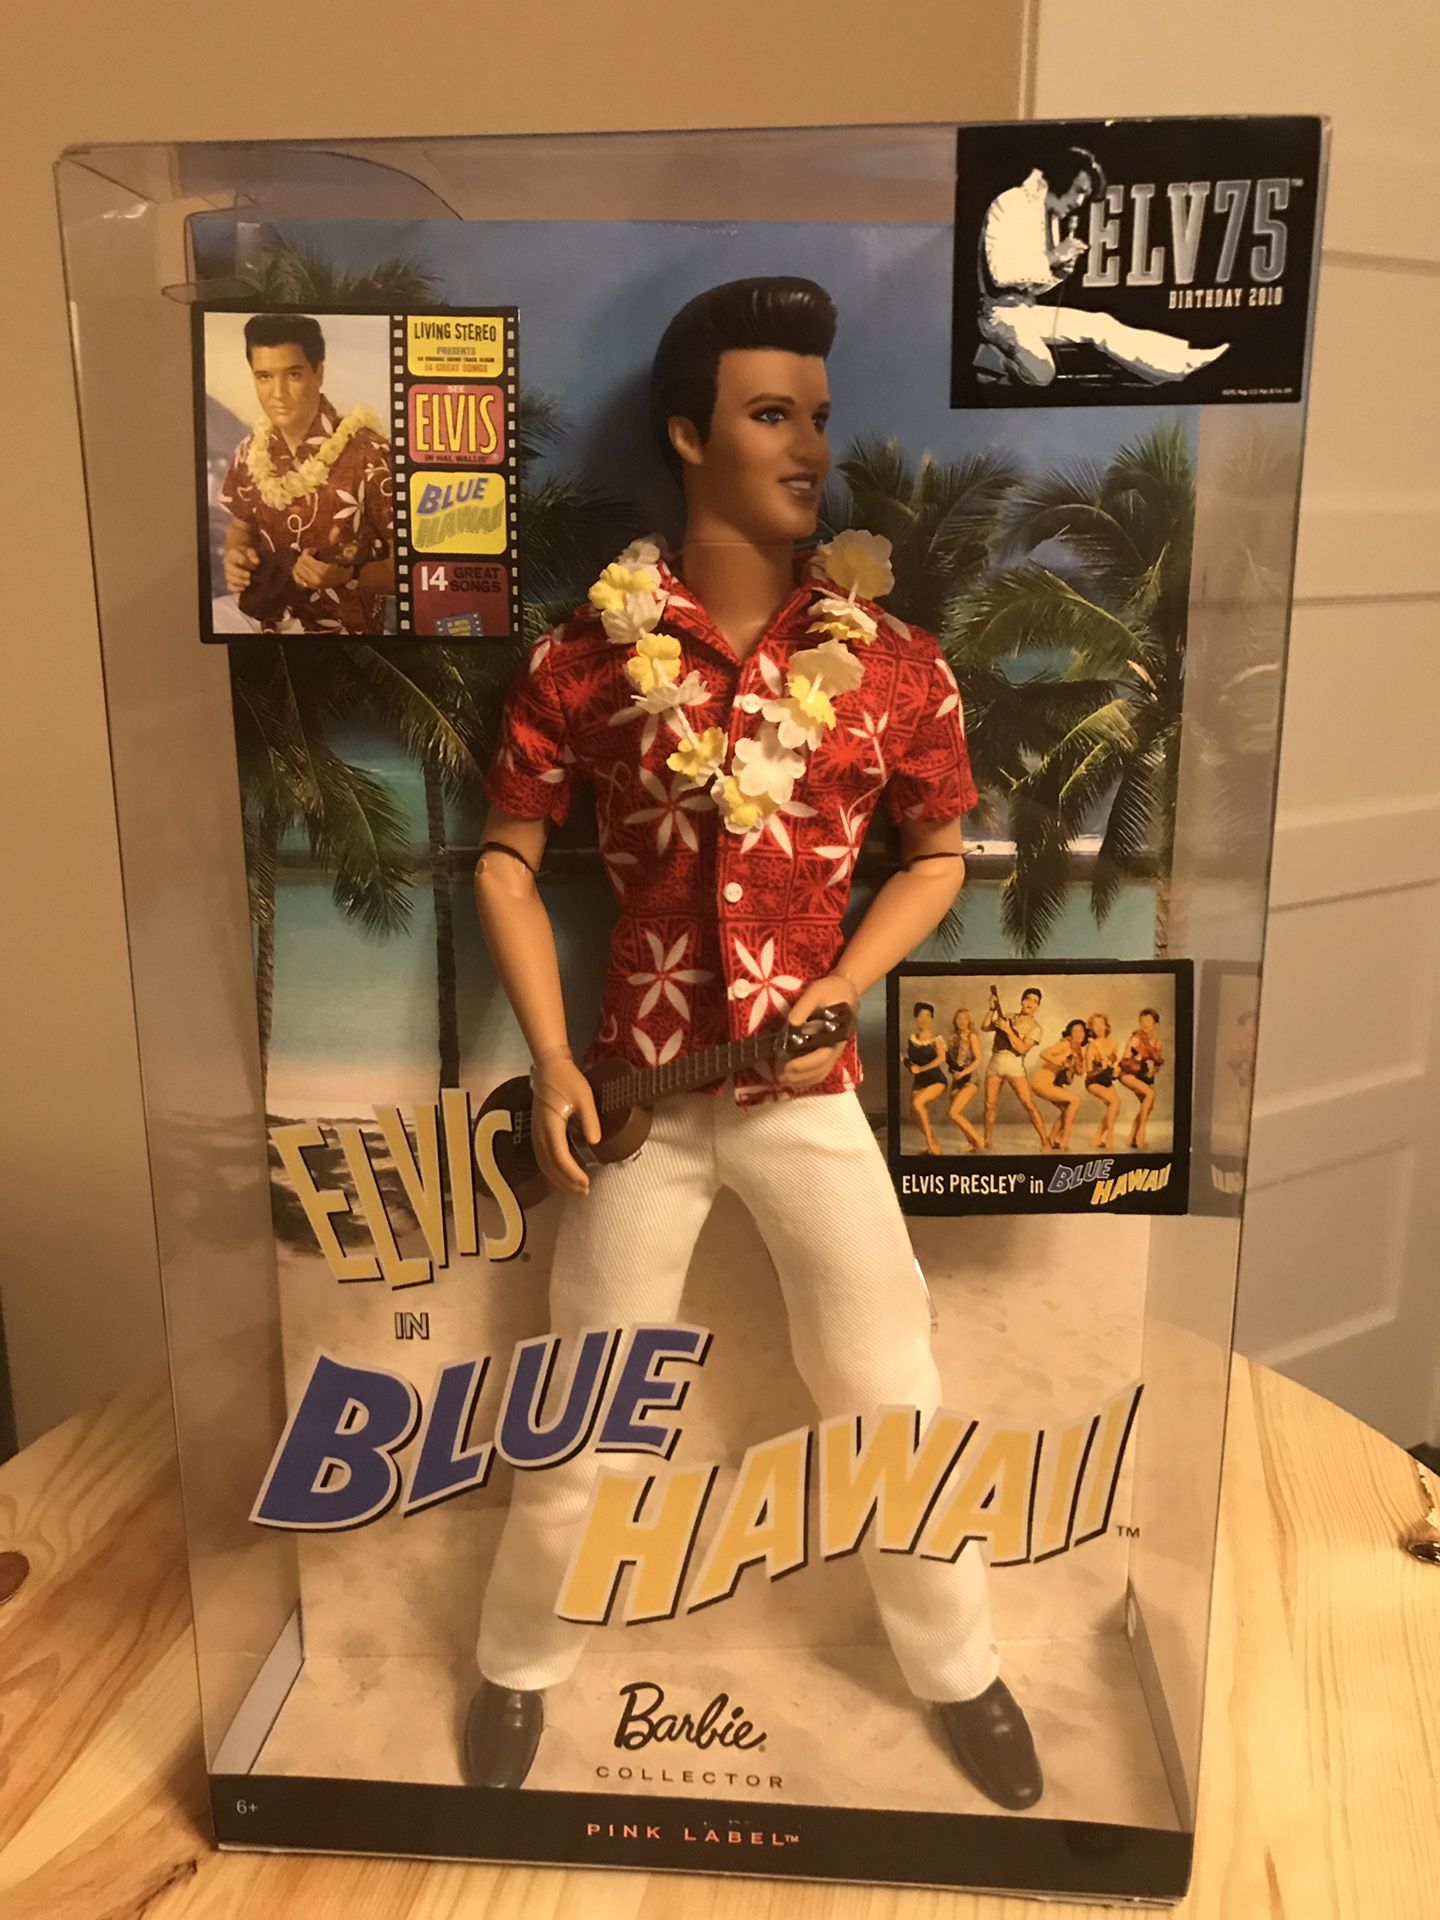 ***ELVIS PRESLEY BLUE HAWAII BARBIE COLLECTOR PINK LABEL DOLL NEW IN BOX***